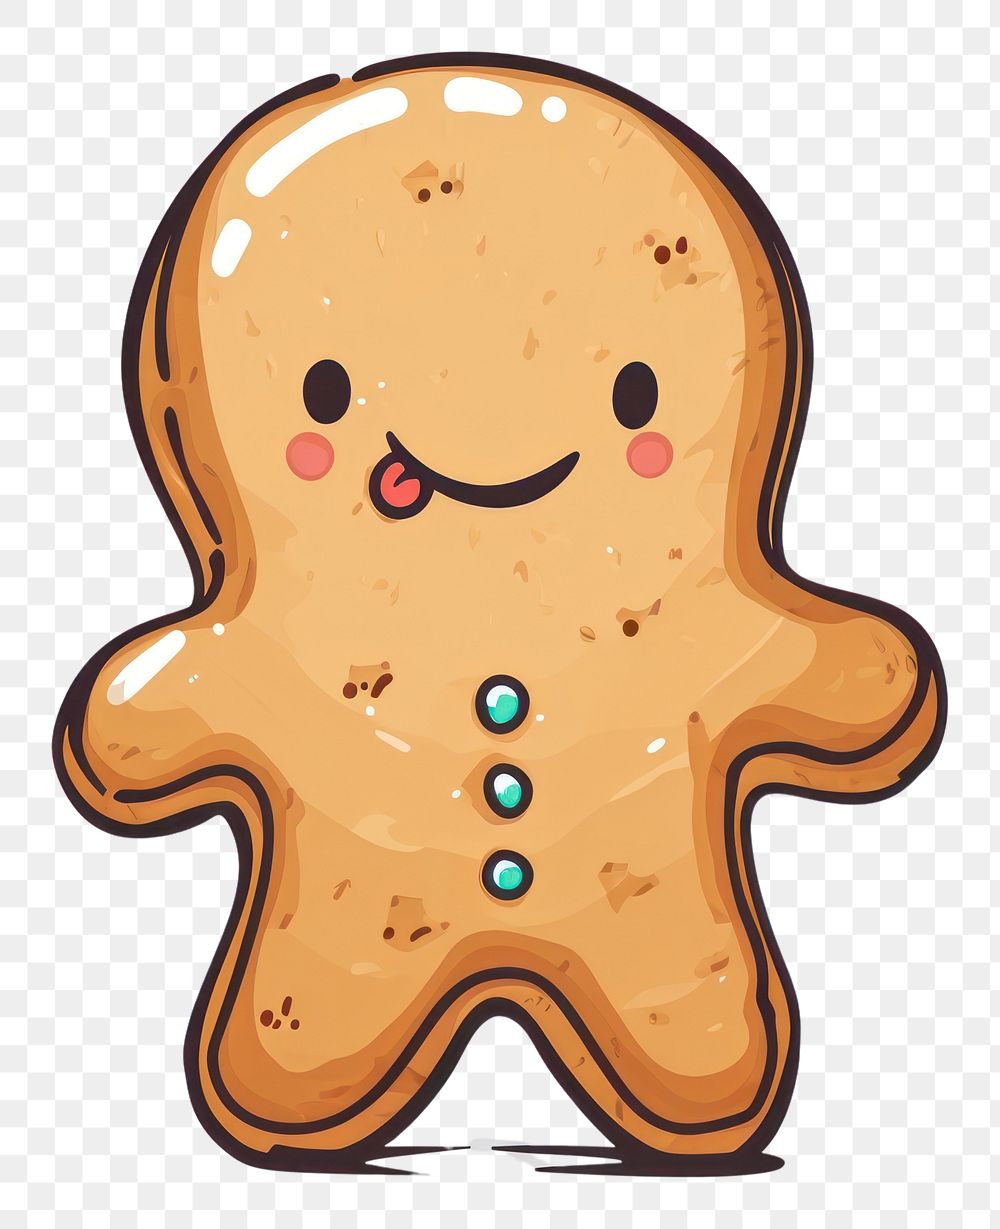 PNG Cutout cookie gingerbread food anthropomorphic.